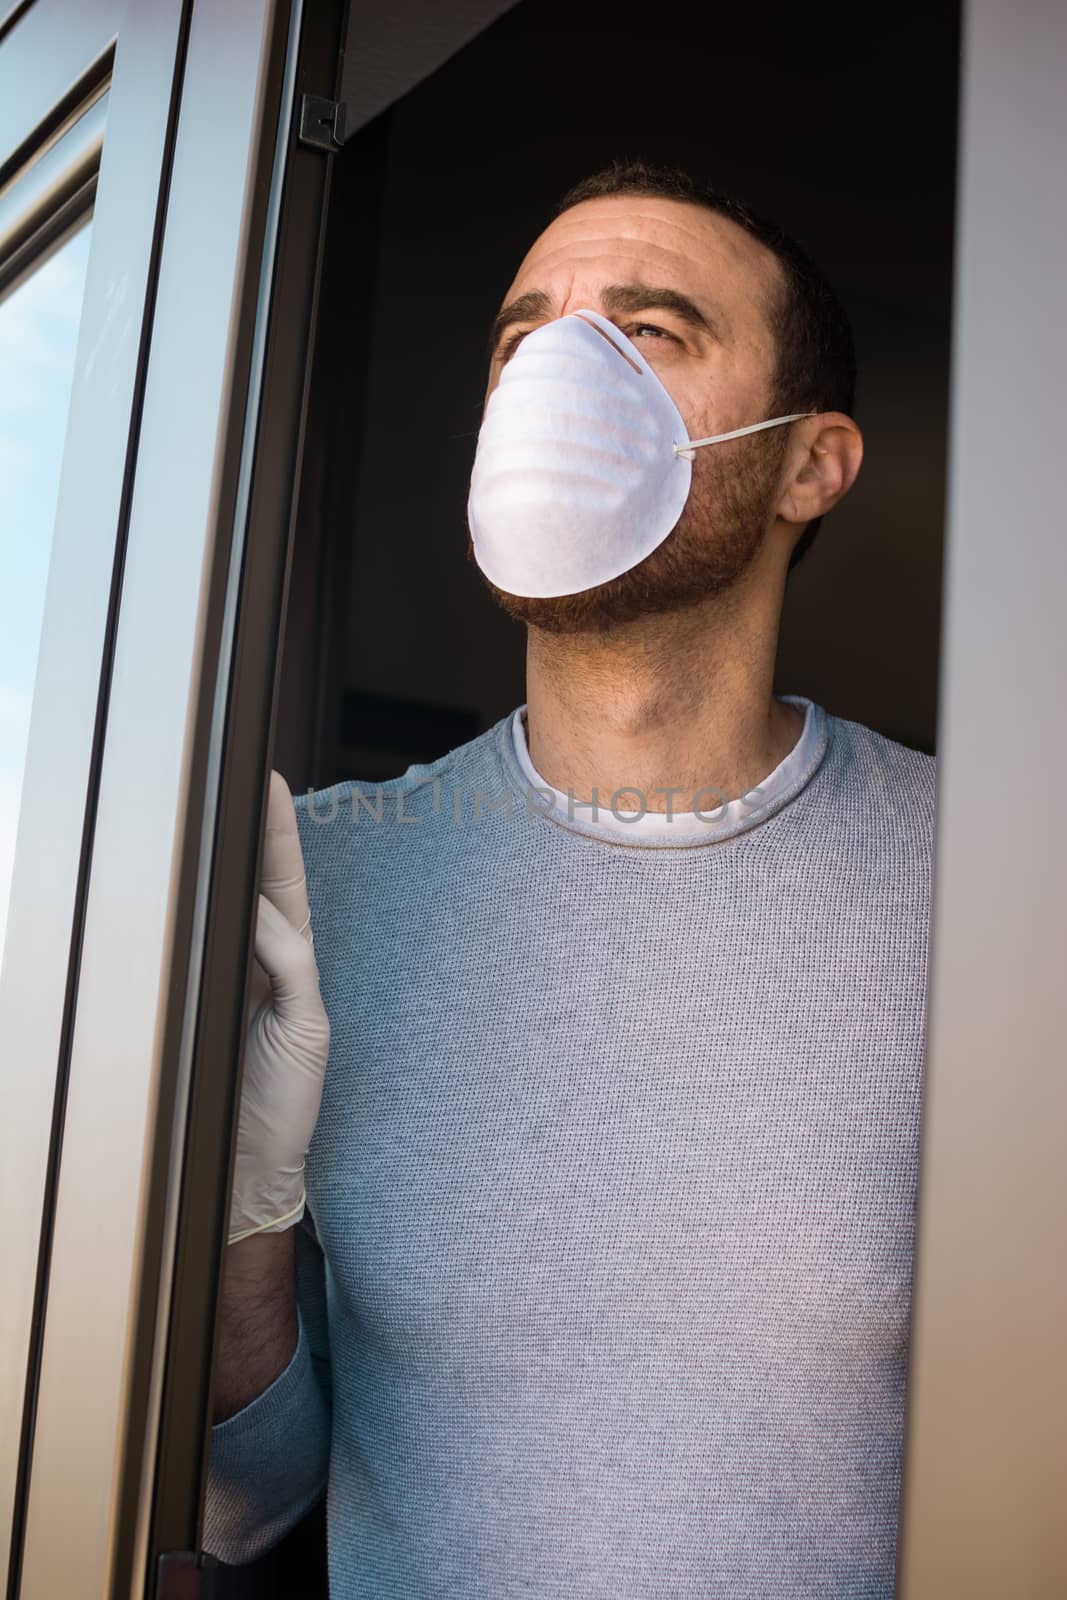 Man with face mask and gloves looking out the window